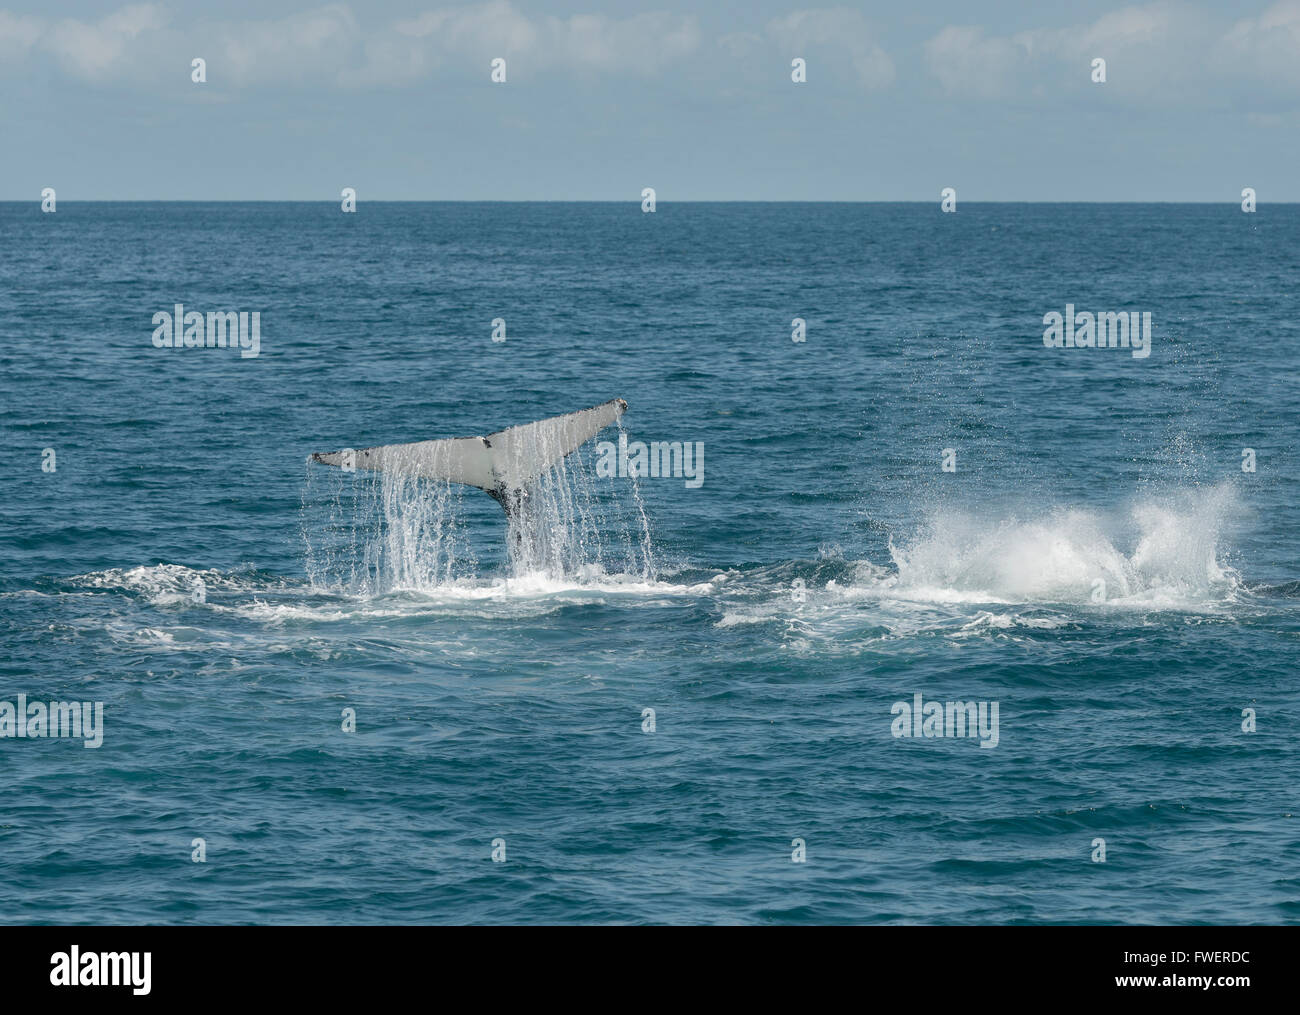 Humpback whale diving and showing its tail at Hervey Bay, Queensland Australia, the perfect place to visit and go whale watching. Stock Photo